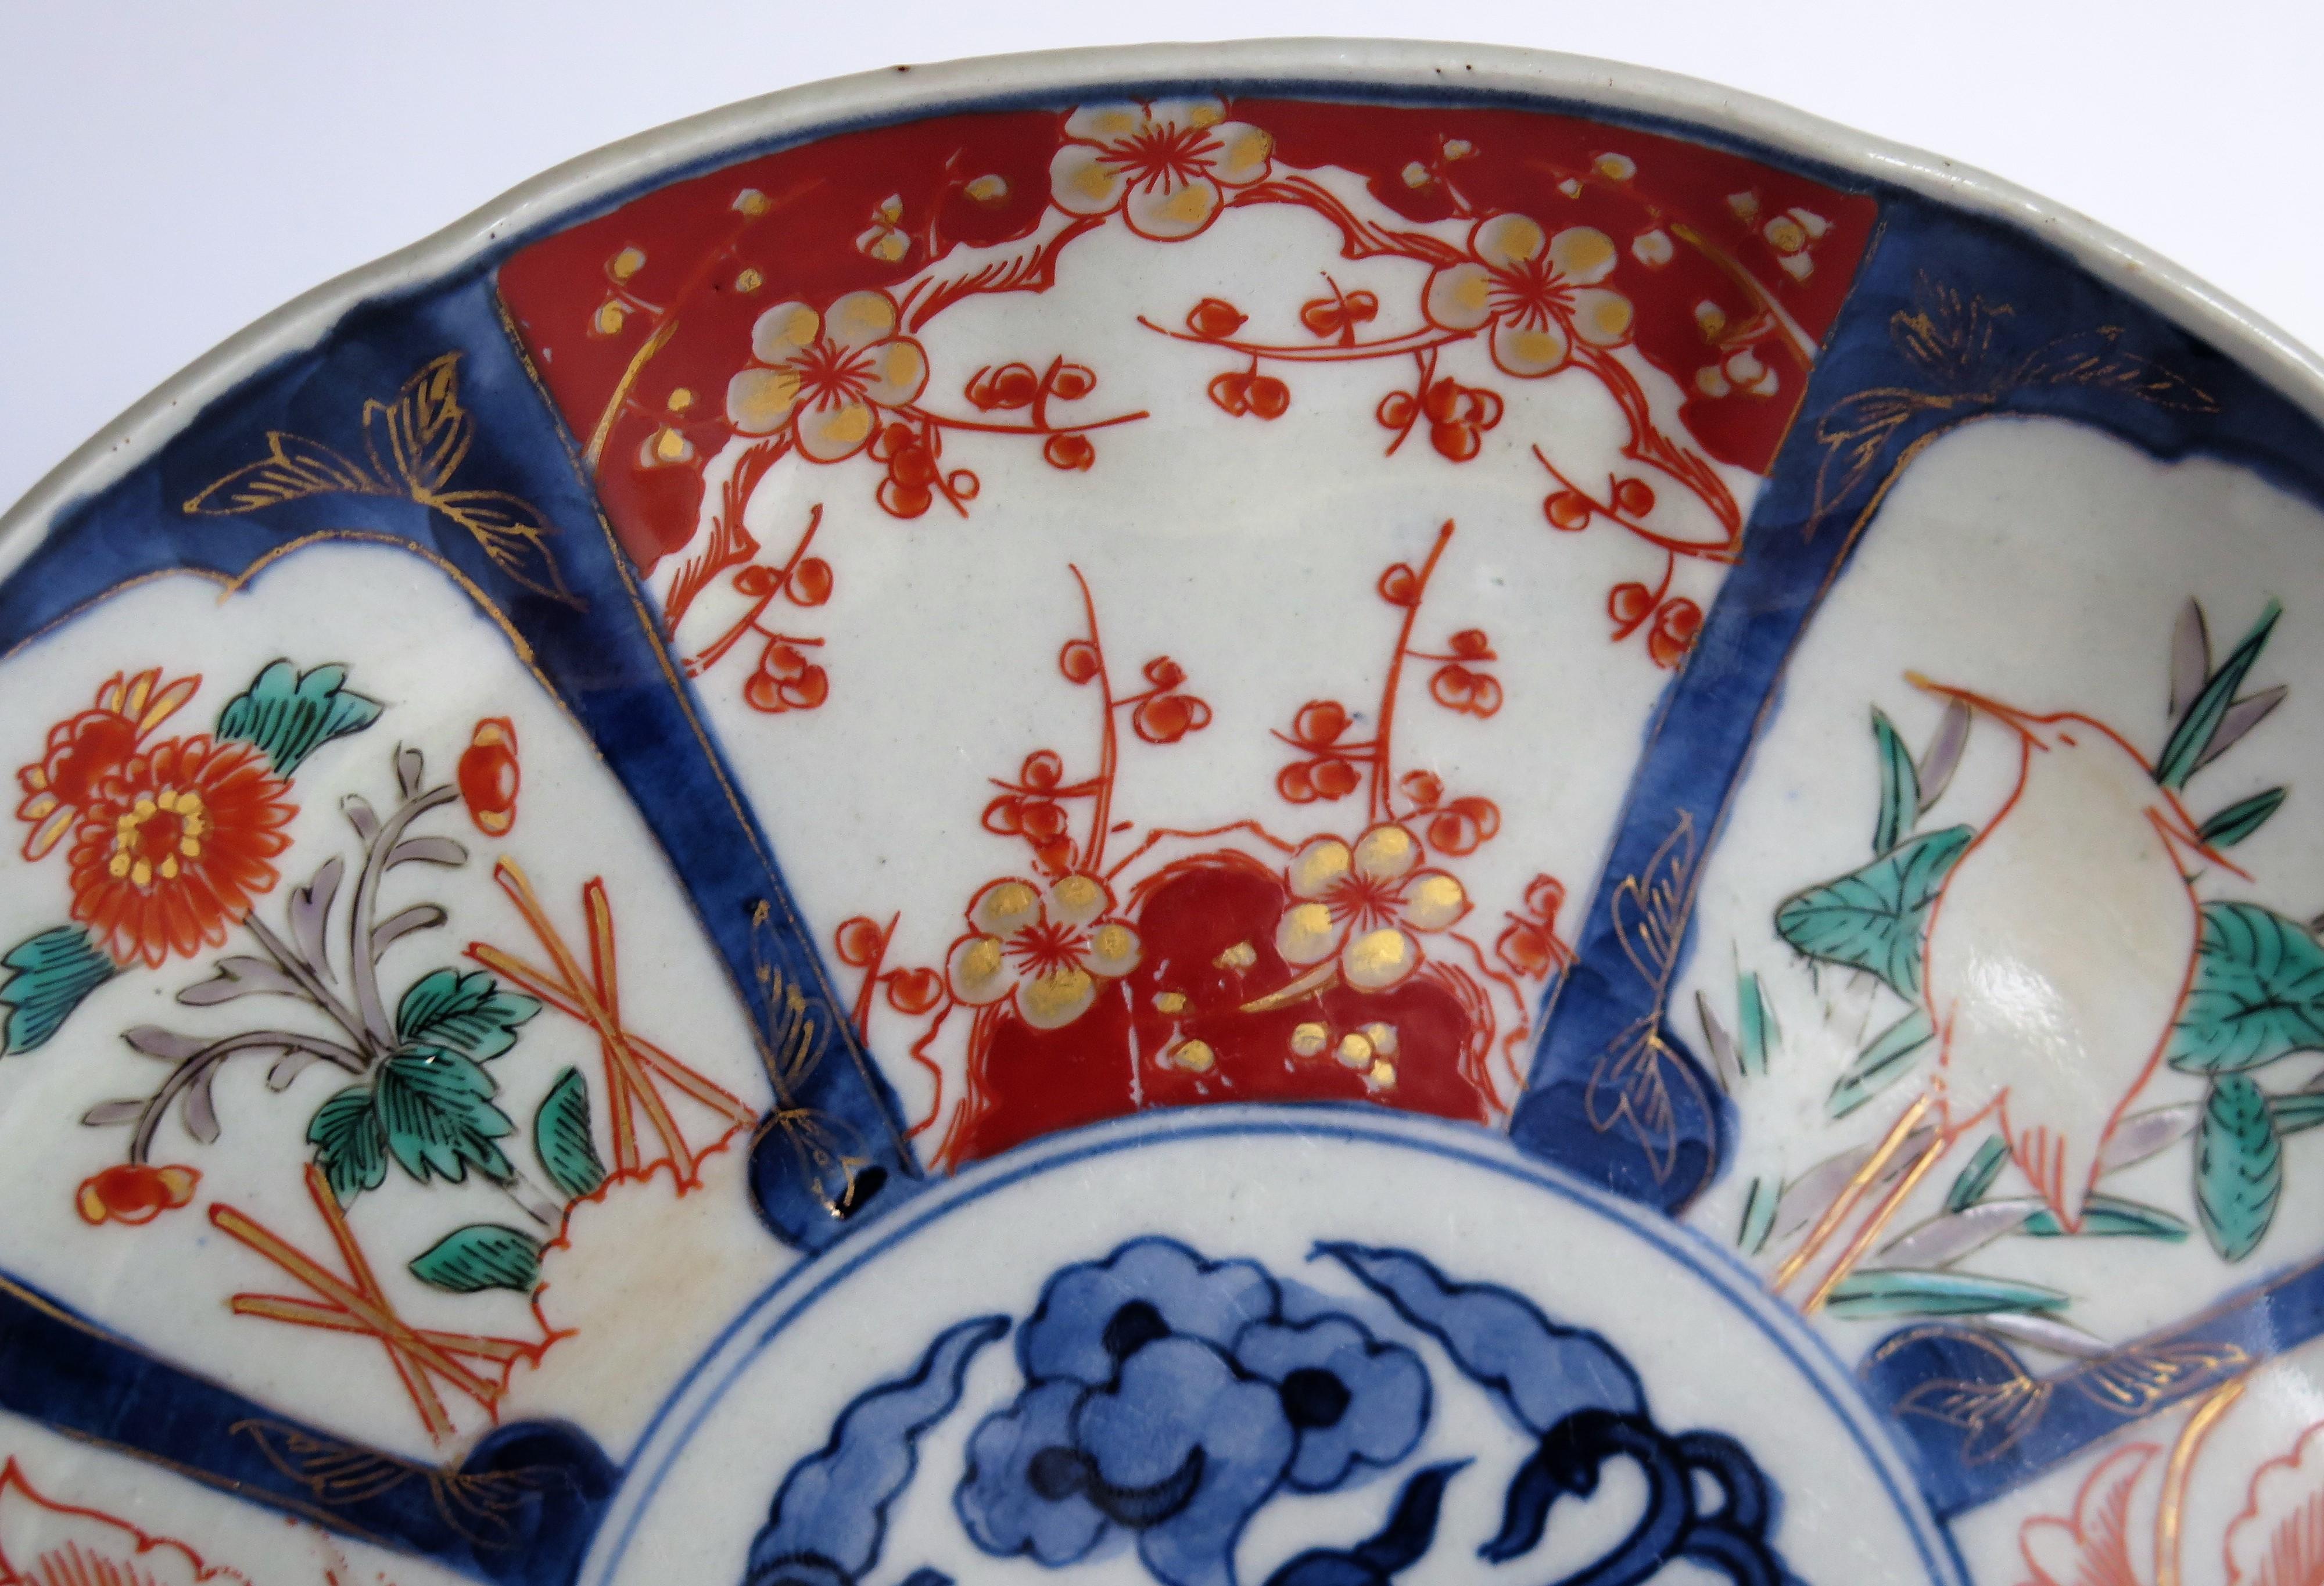 Japanese Porcelain Large Plate or Hand Painted Imari, 19th Century Meiji Period  12